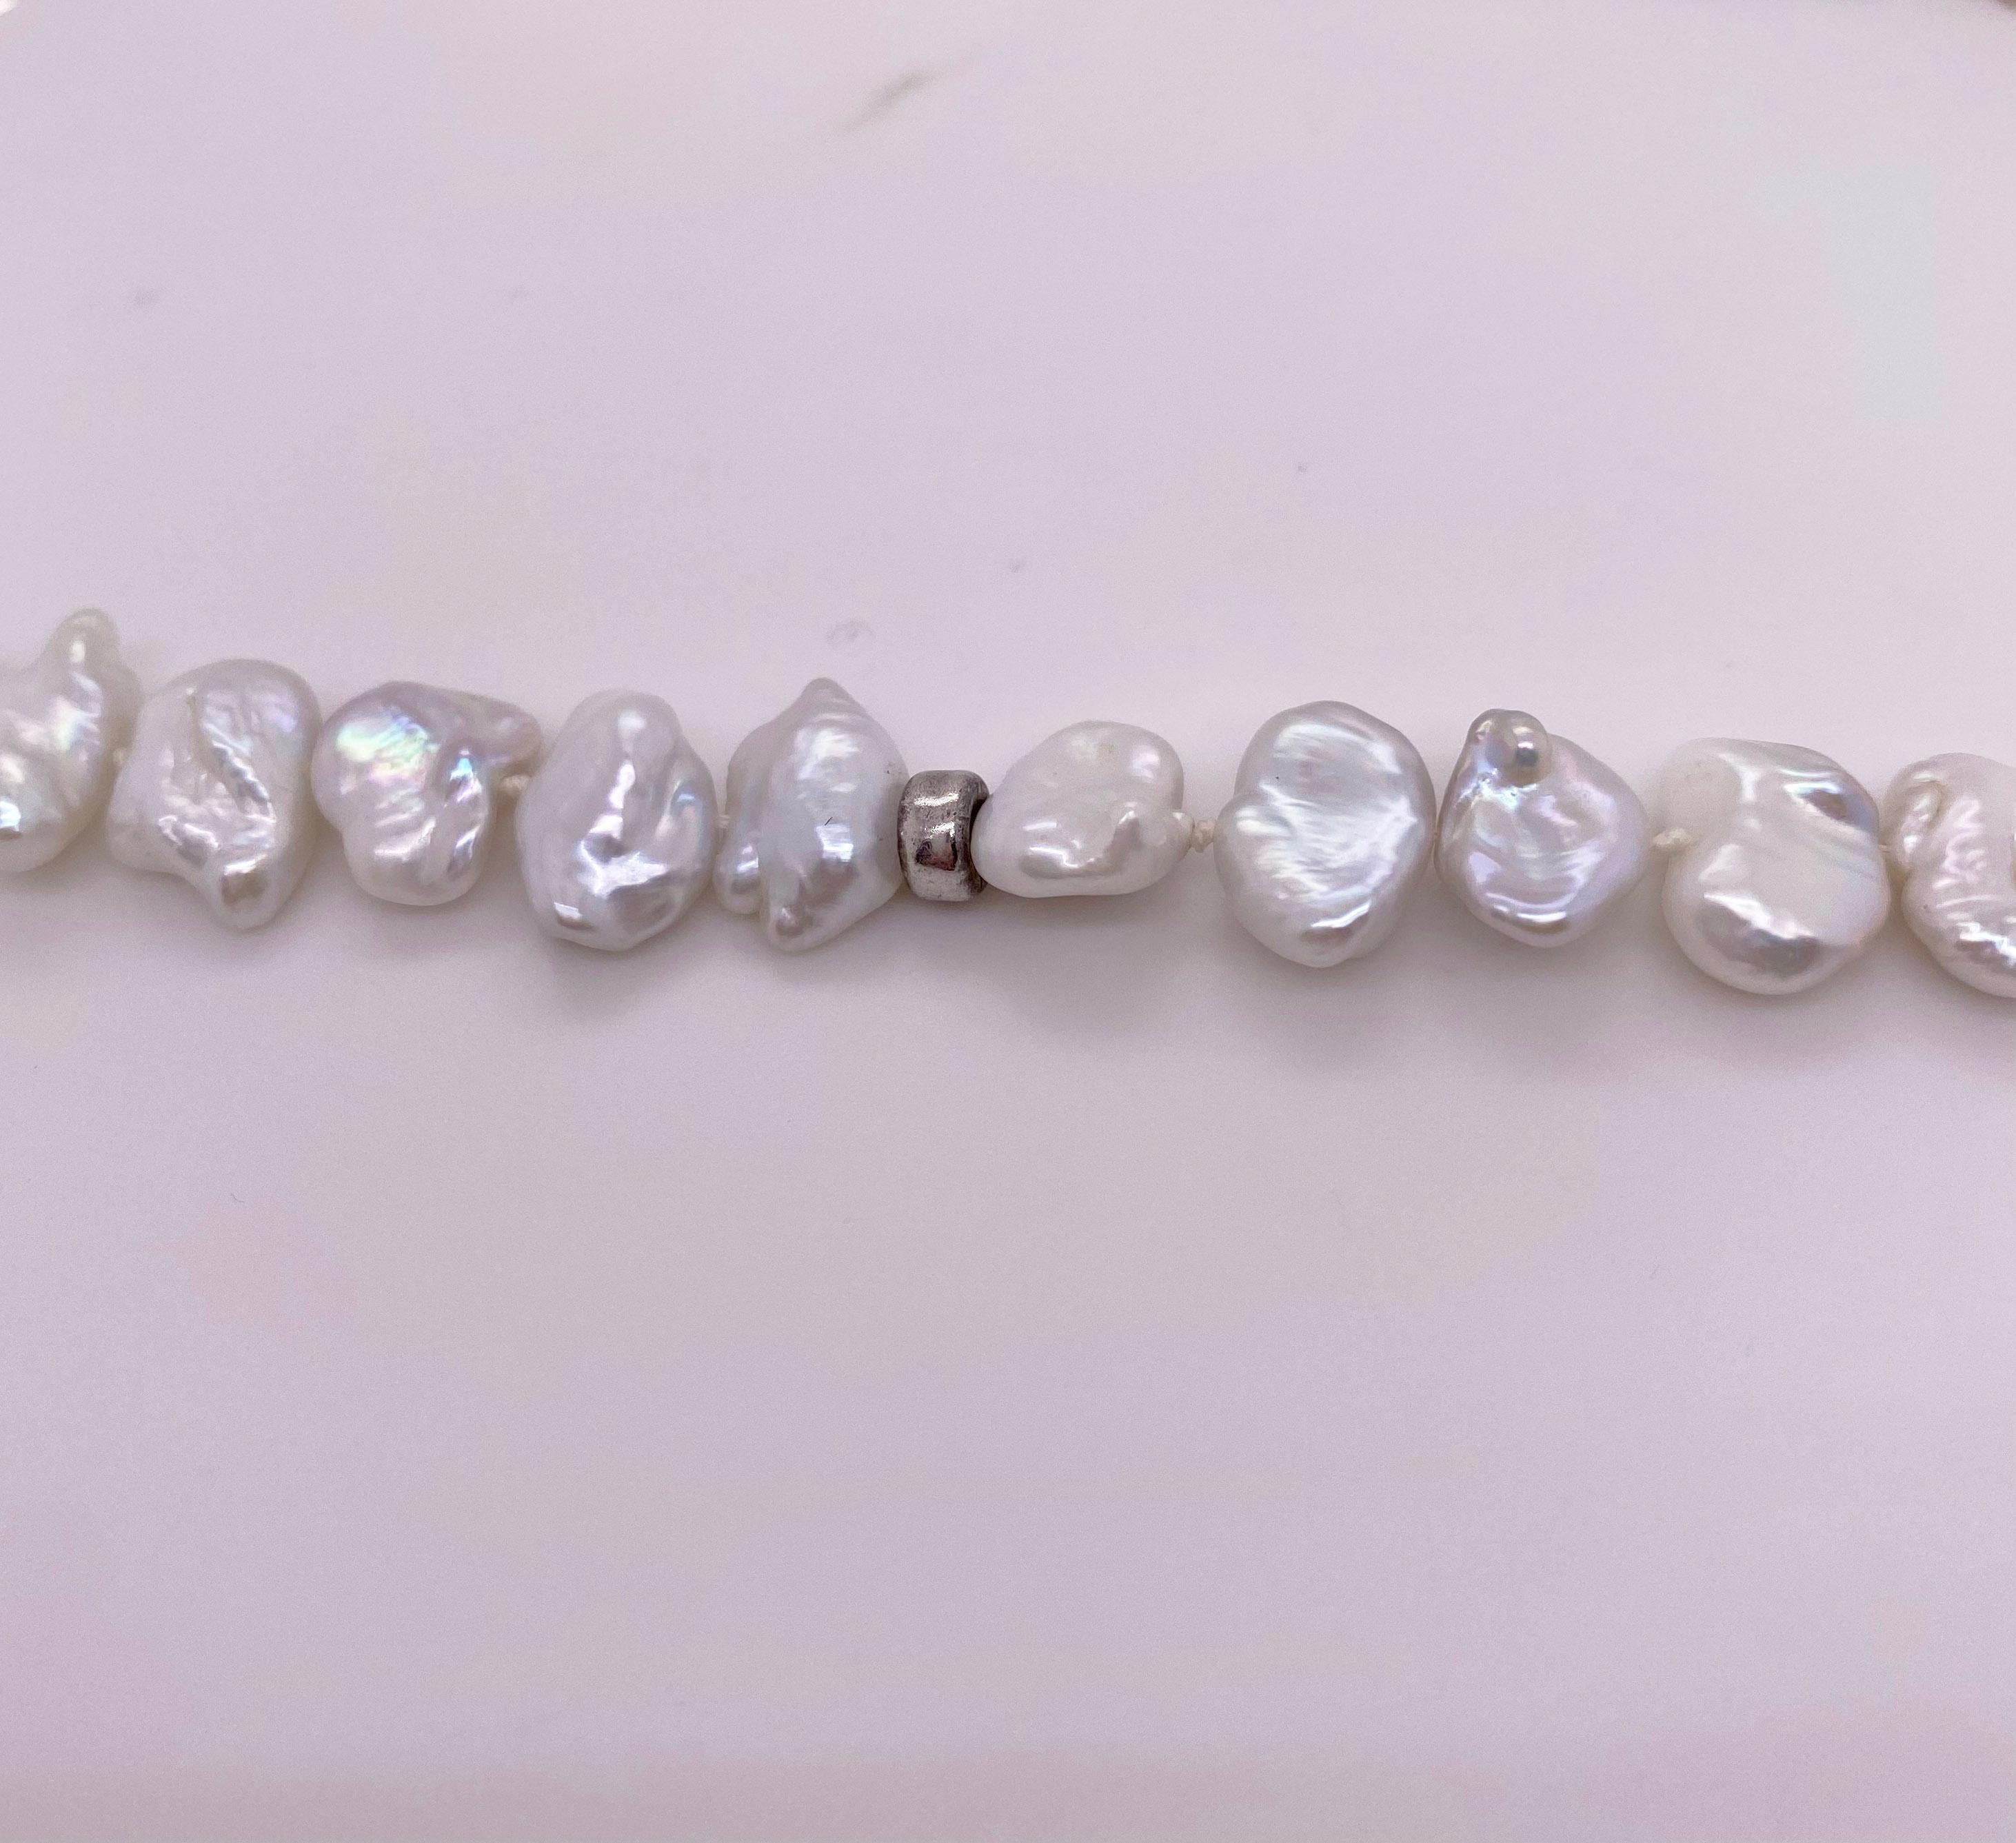 This organic cultured Keishi pearl necklace is 33 inches long and each pearl has a gorgeous grey/white color.  They are perfectly matching. The necklace has  The details for this beautiful necklace are listed below:
Metal Quality:  Sterling Sliver